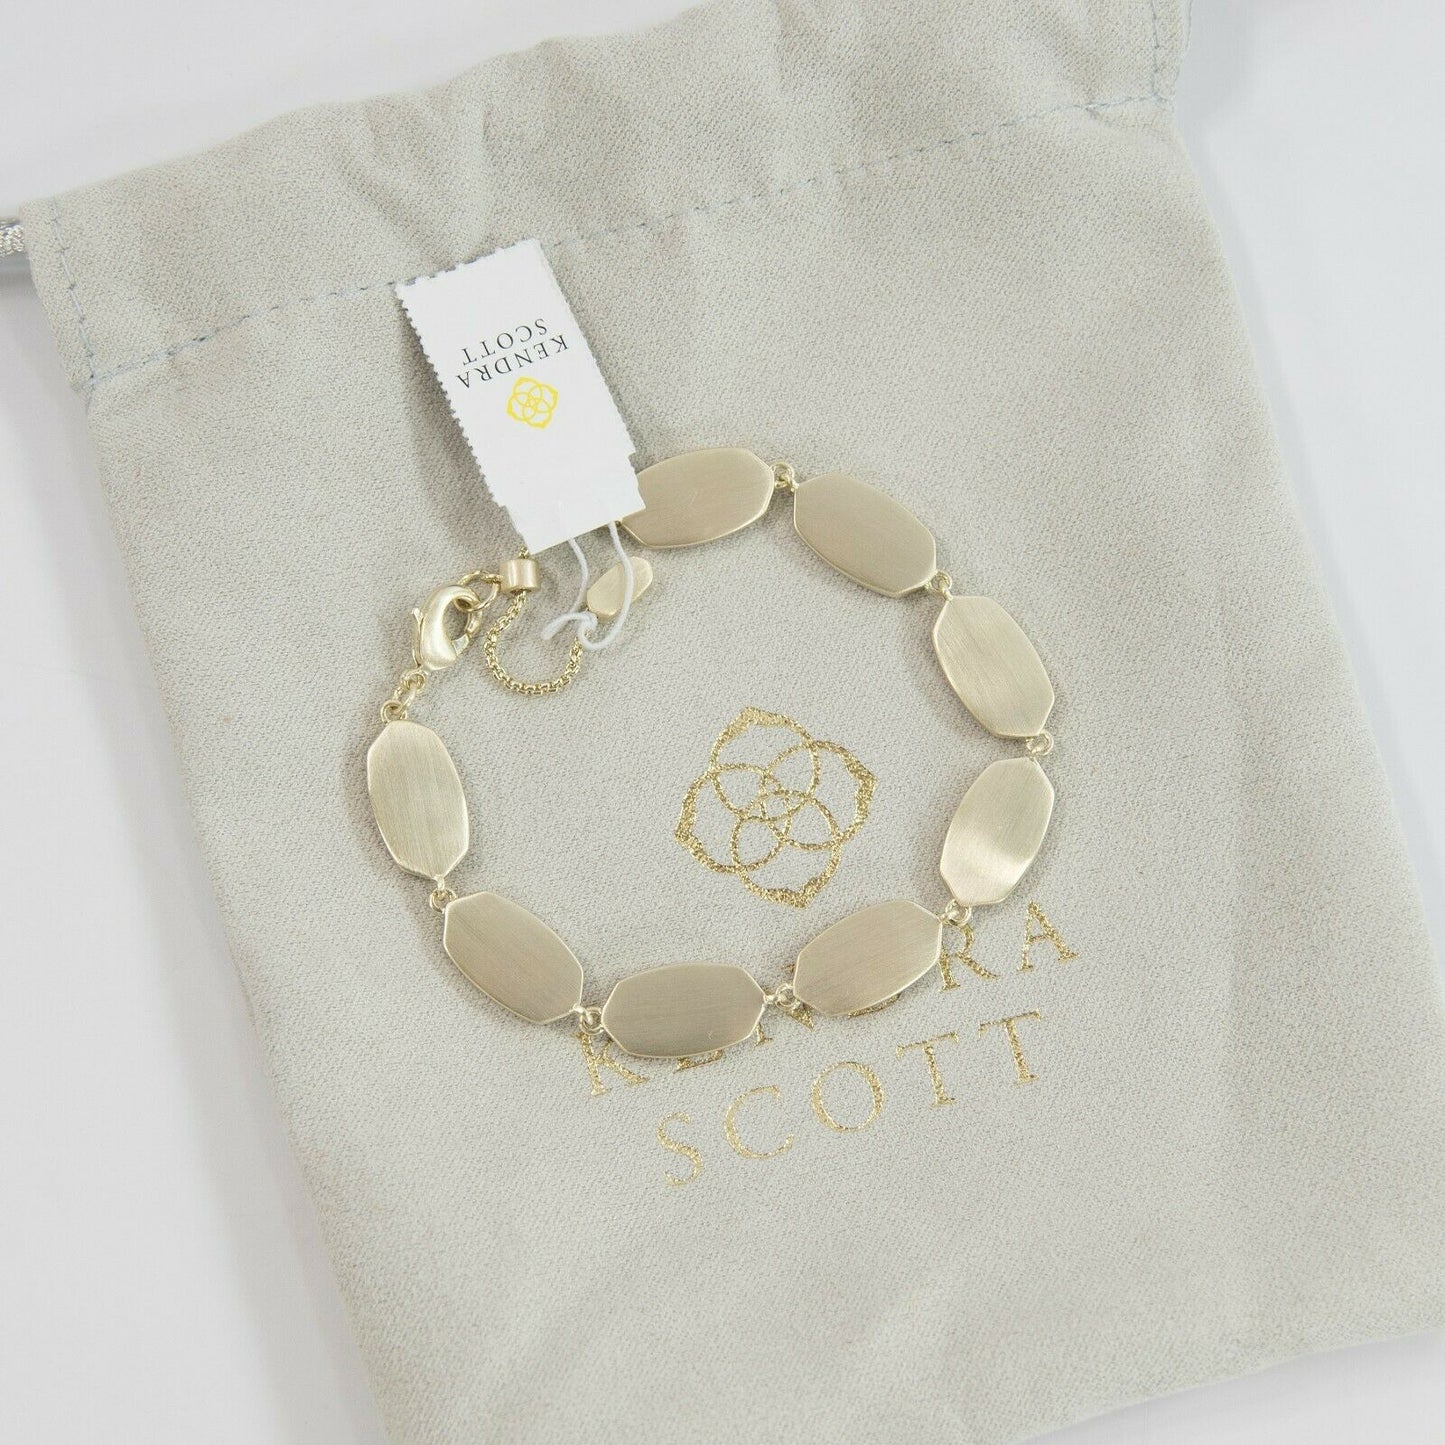 Kendra Scott Millie Peach Mother of Pearl Gold Chain Bracelet NWT